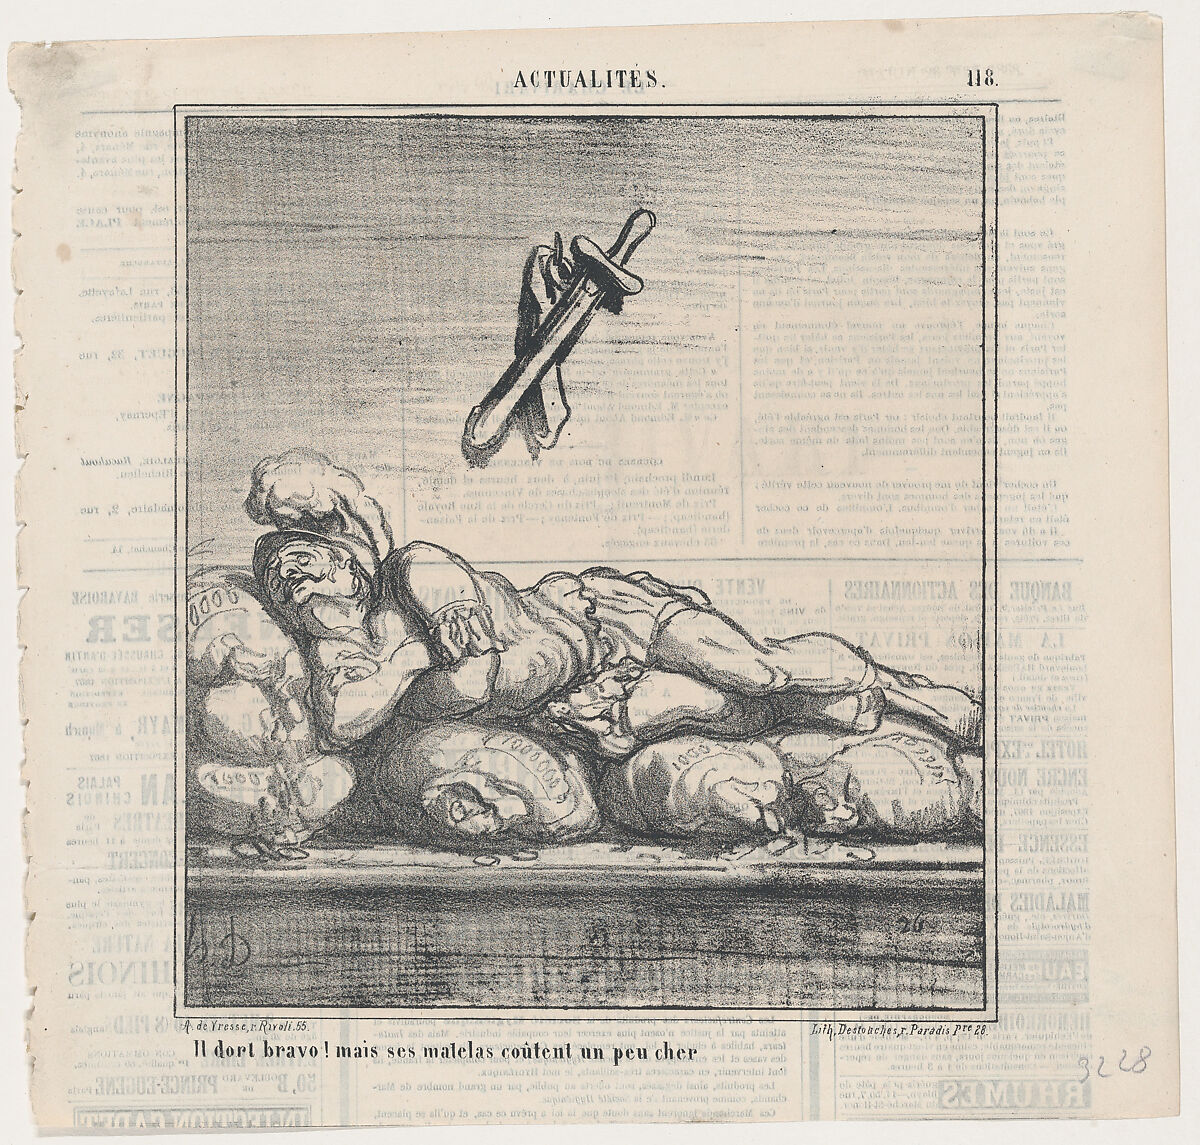 Bravo, he is asleep, but his mattress is a bit expensive, from "News of the day", Honoré Daumier (French, Marseilles 1808–1879 Valmondois), Lithograph on newsprint; third state of three (Delteil) 